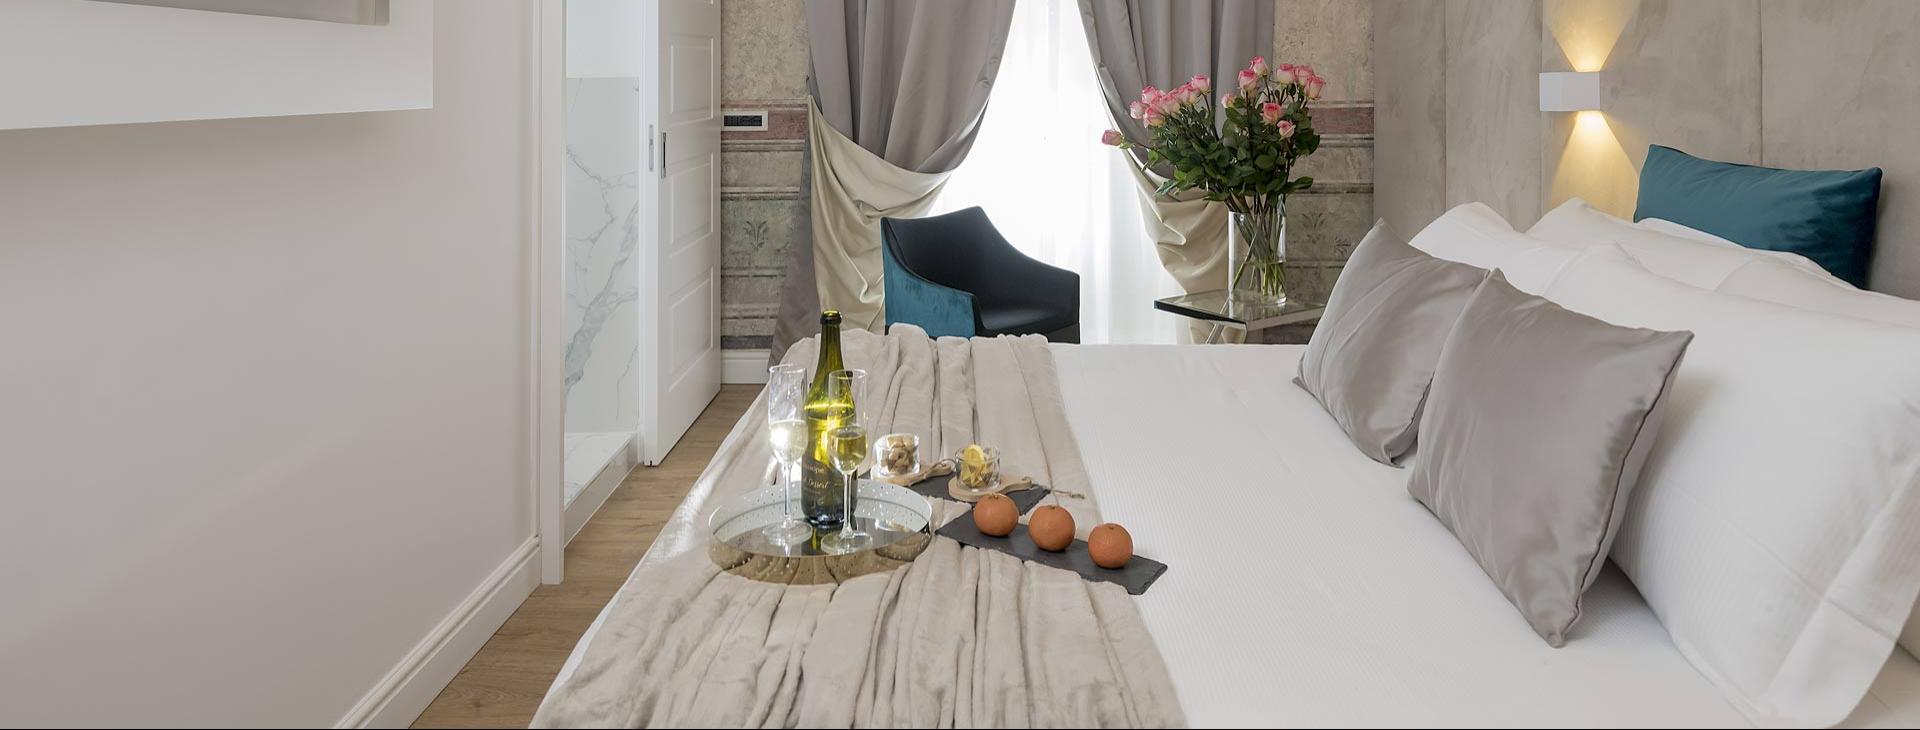 navonastyle fr navona-guest-house-chambre-classic 001